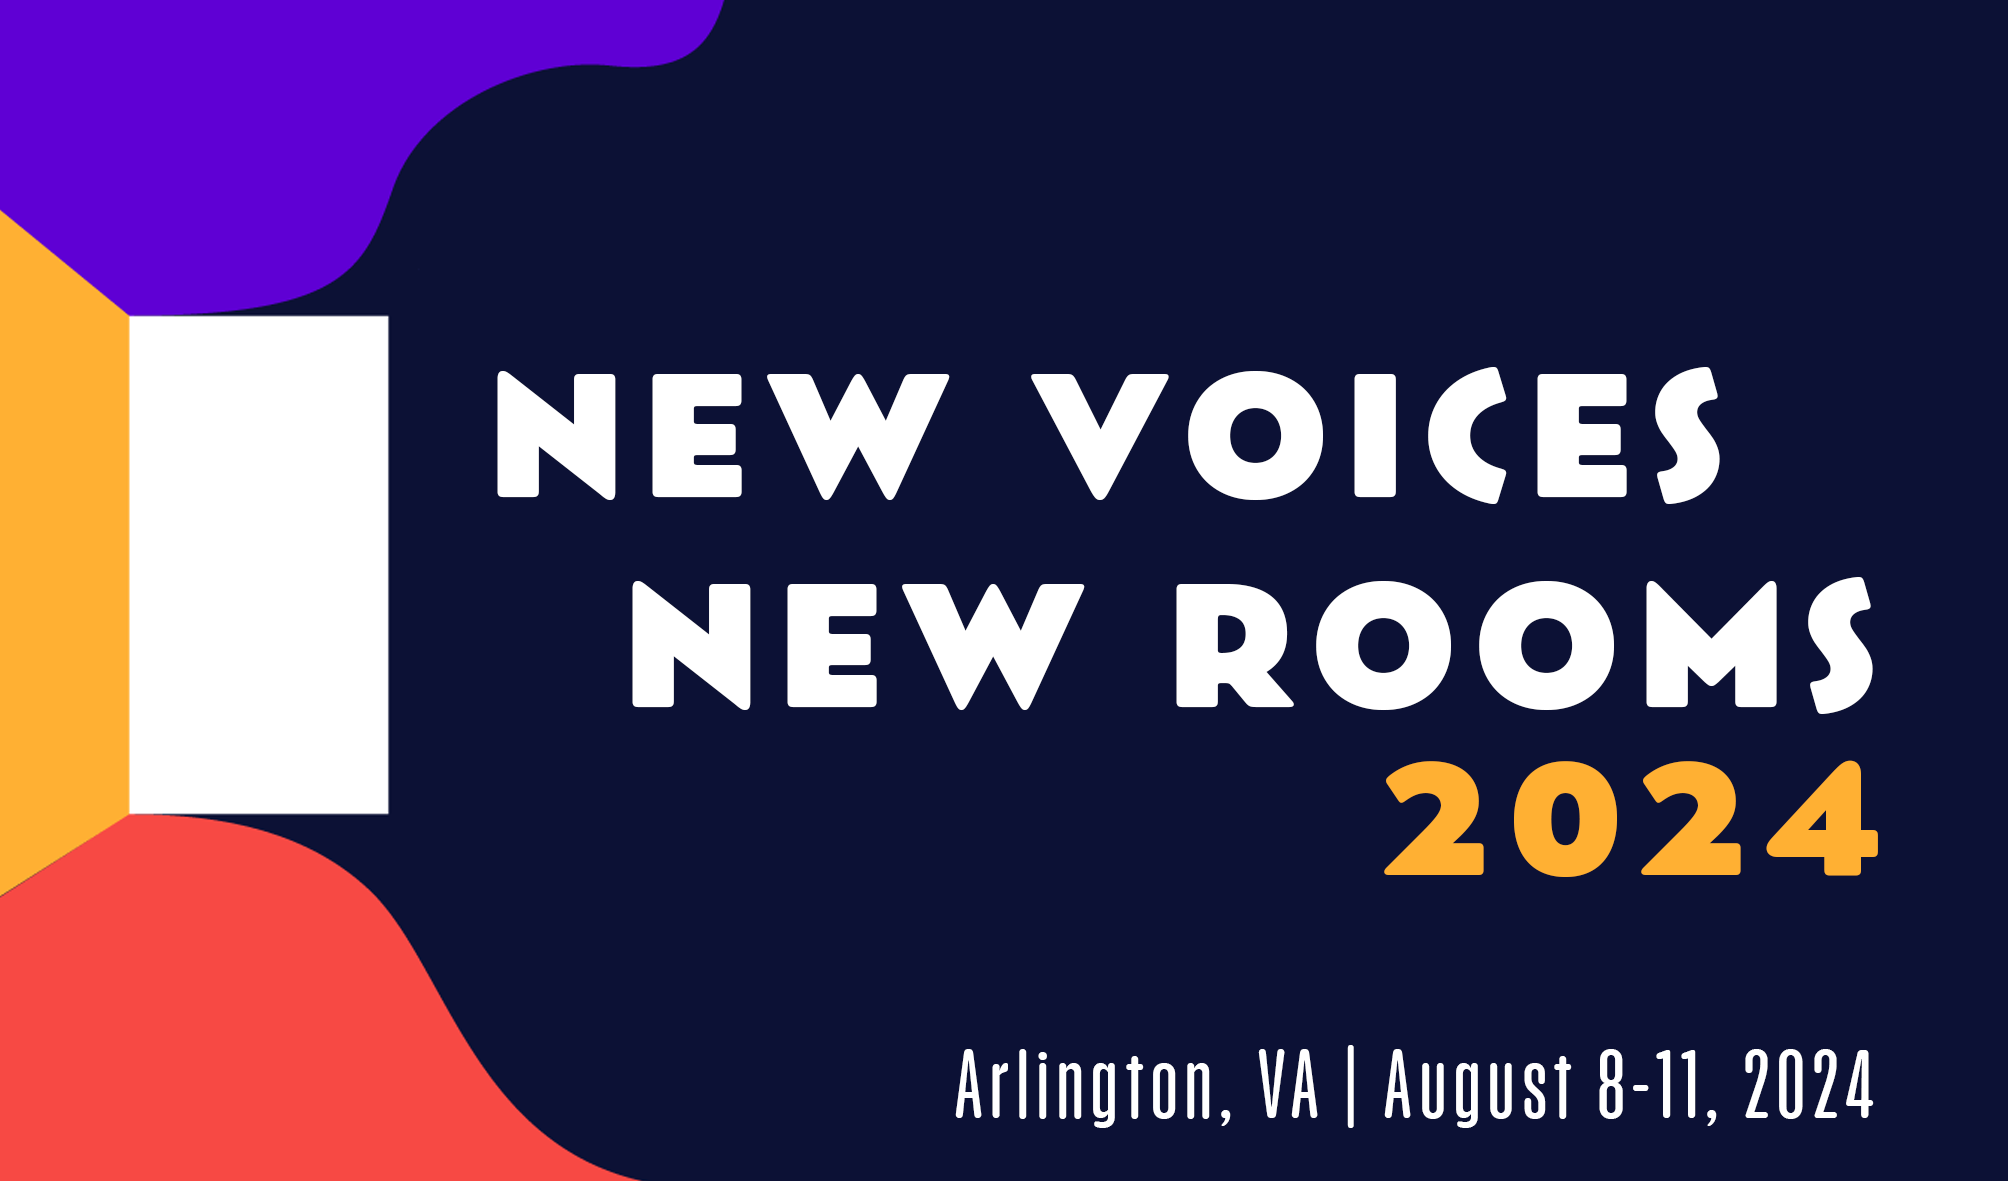 New Voices New Rooms 2024 Conference: August 8-11, in Arlington, VA